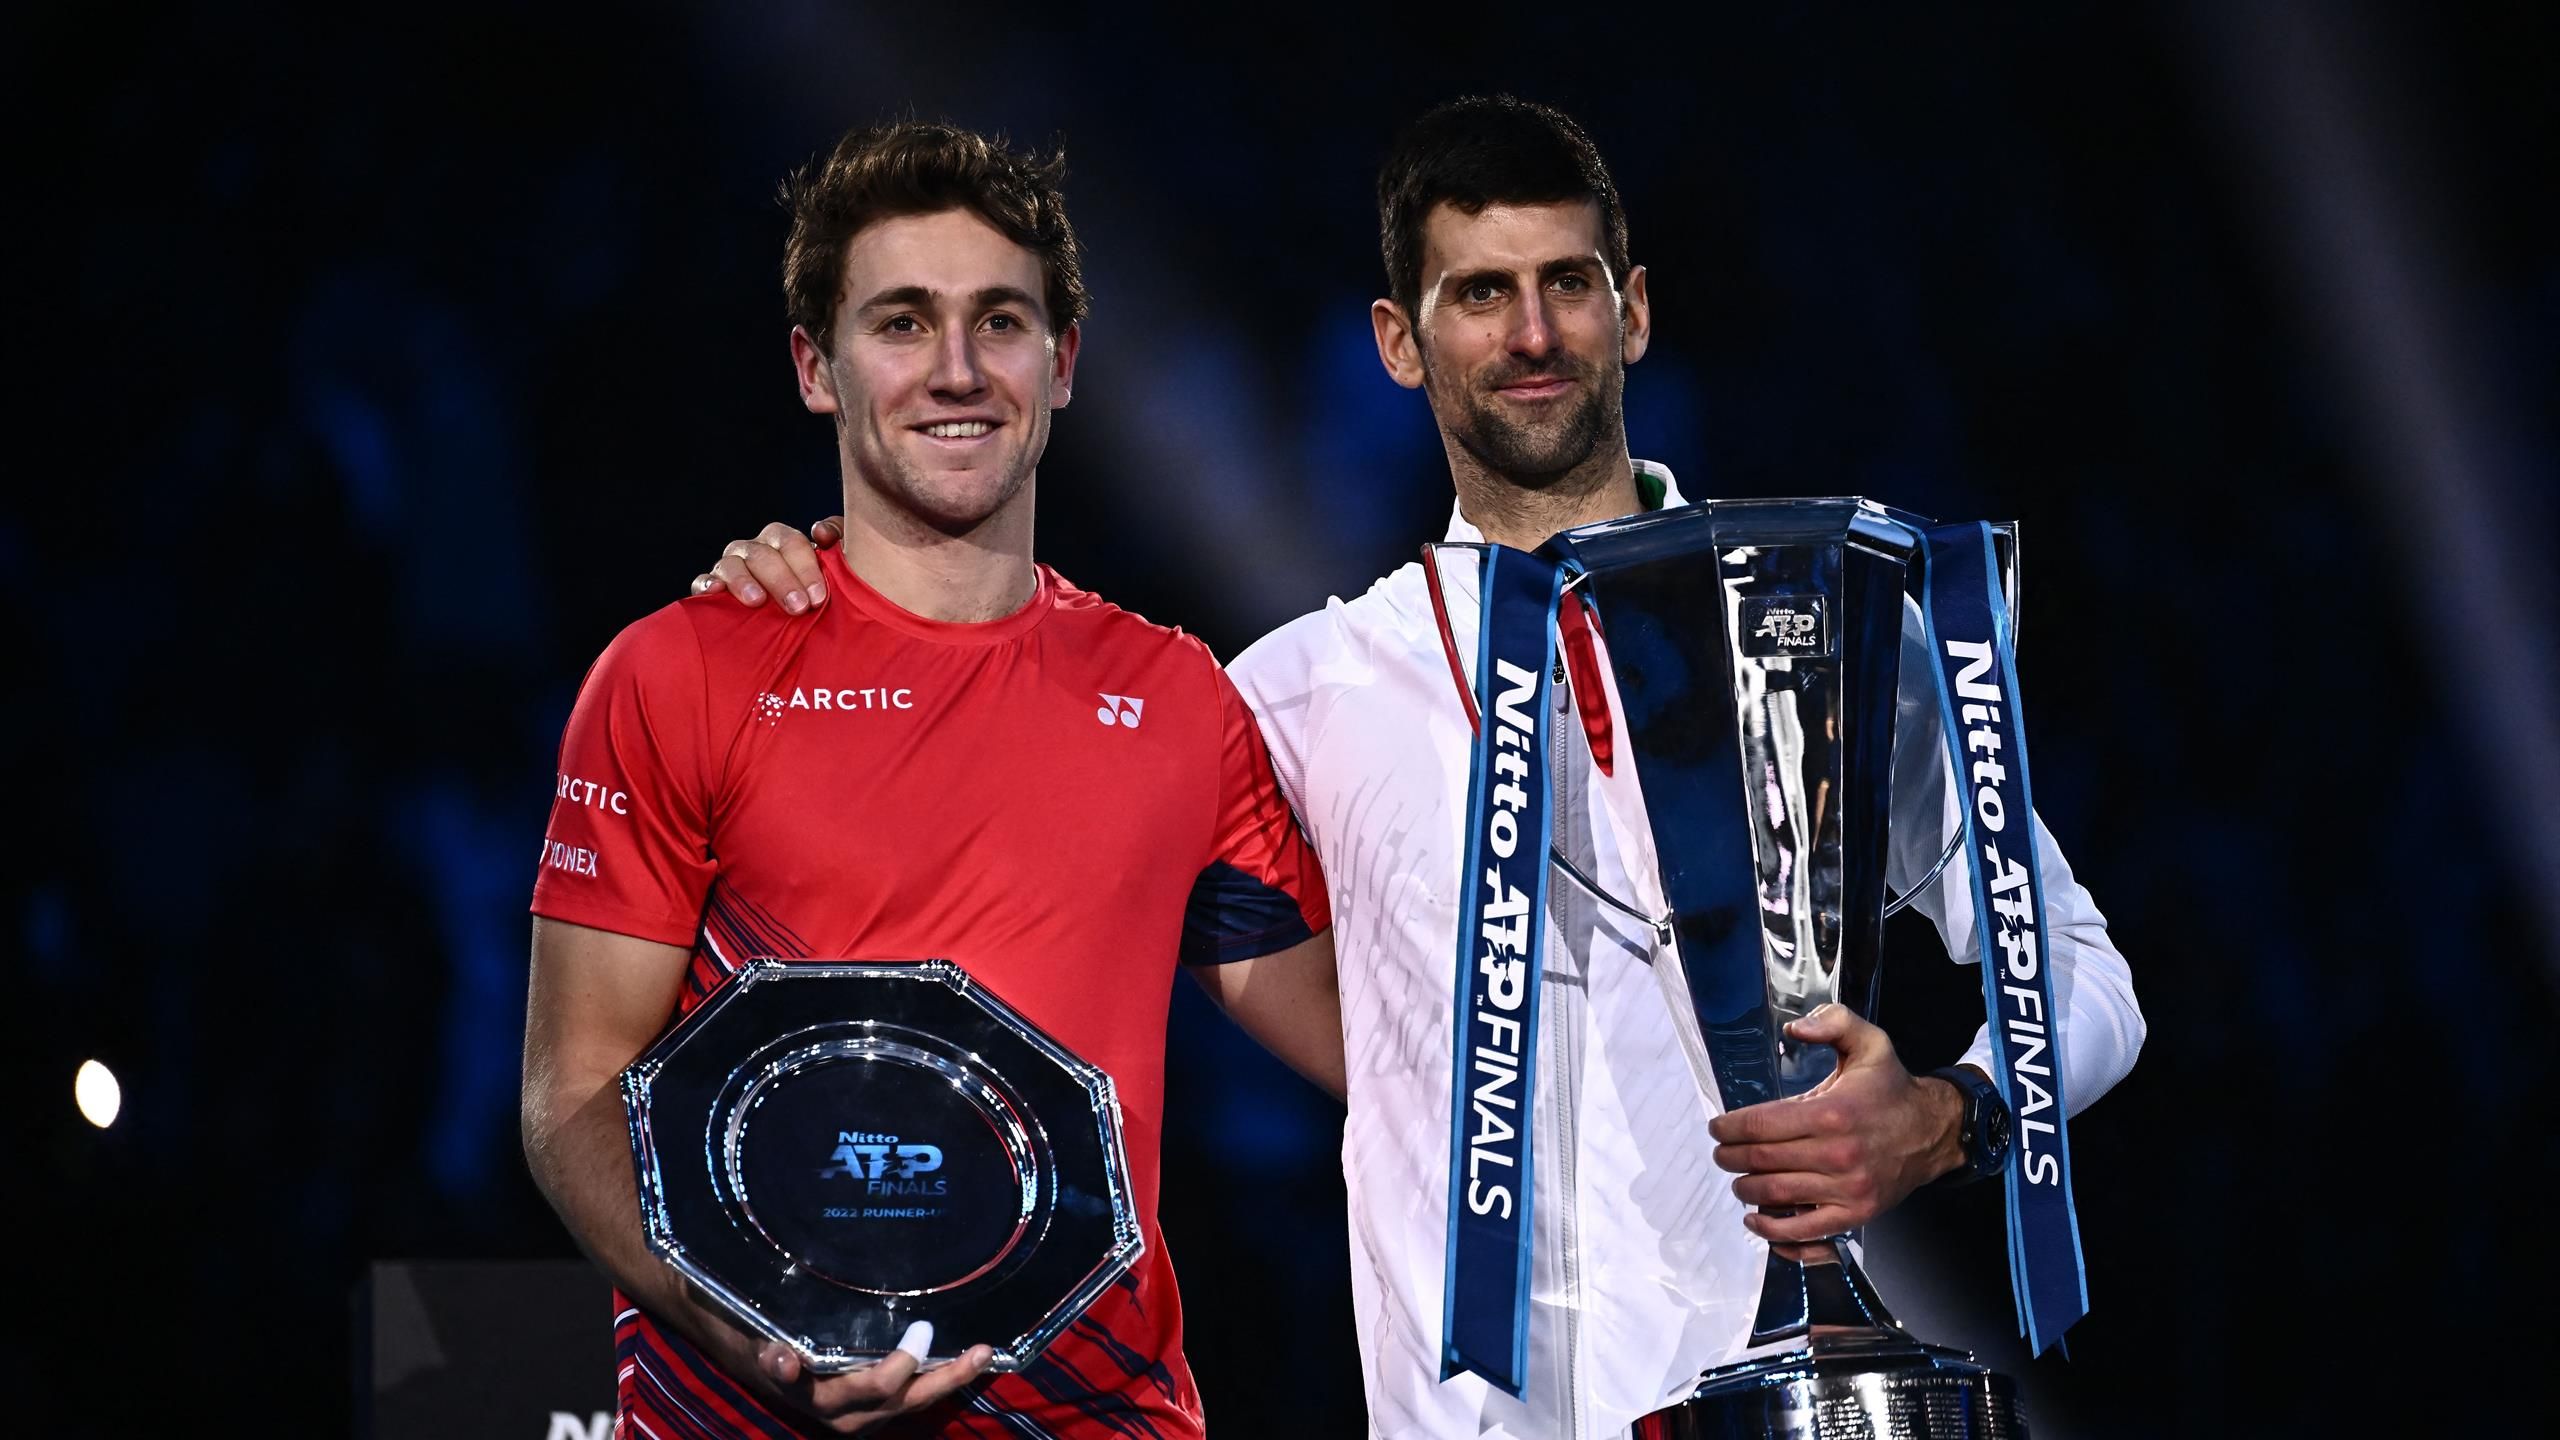 Novak Djokovic lauded by Casper Ruud at ATP Finals - Cant imagine how difficult this year has been for you